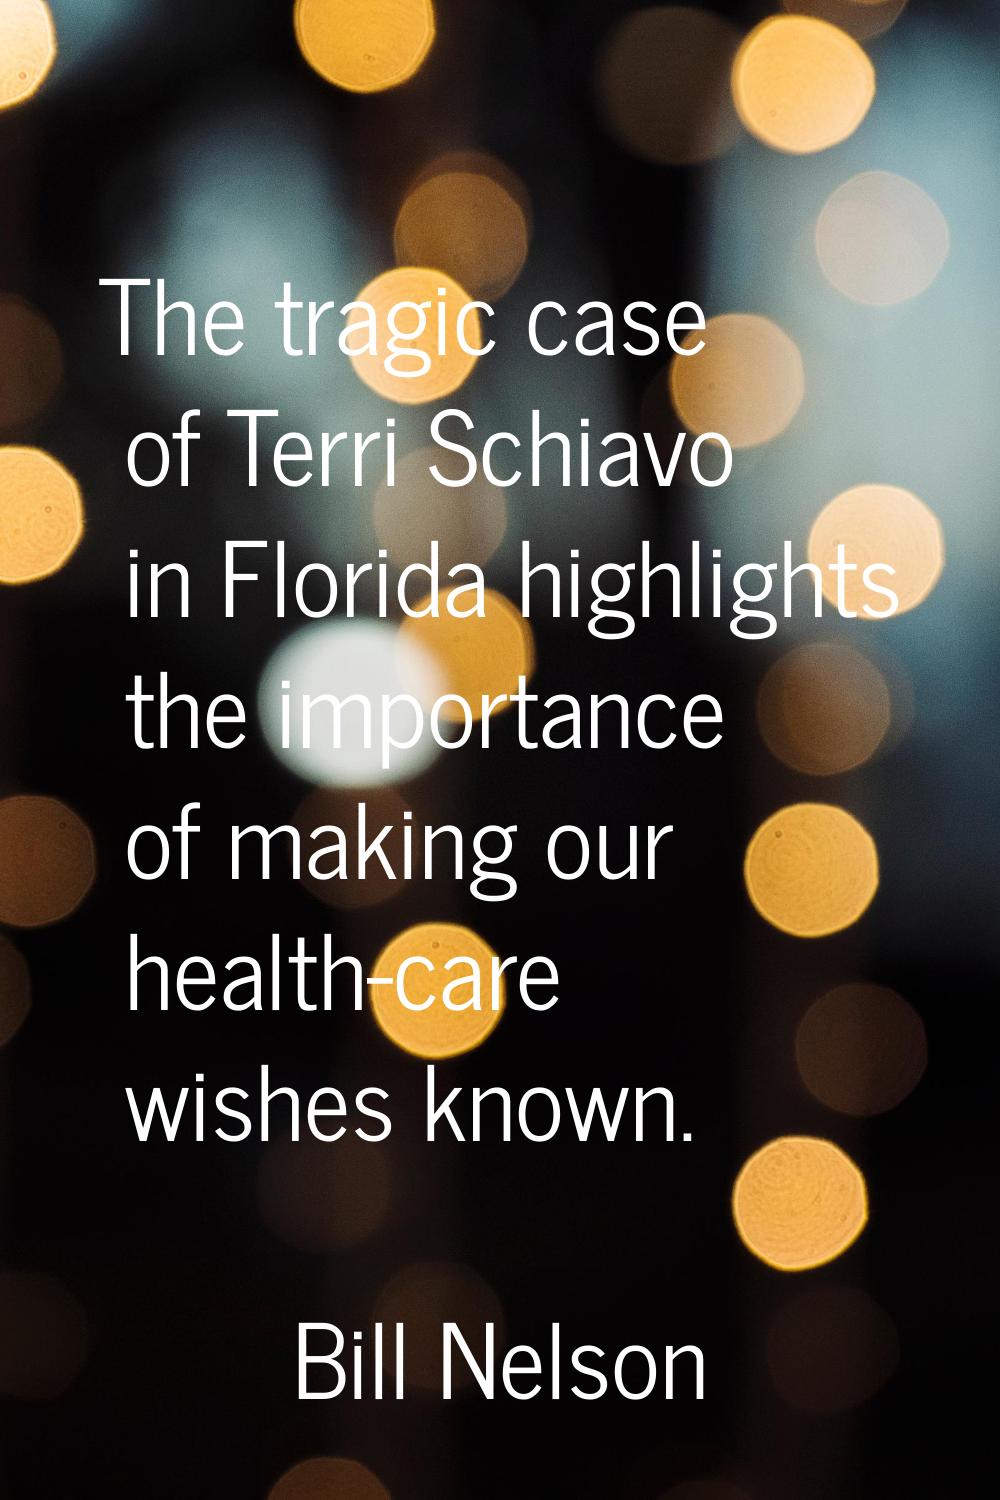 The tragic case of Terri Schiavo in Florida highlights the importance of making our health-care wis